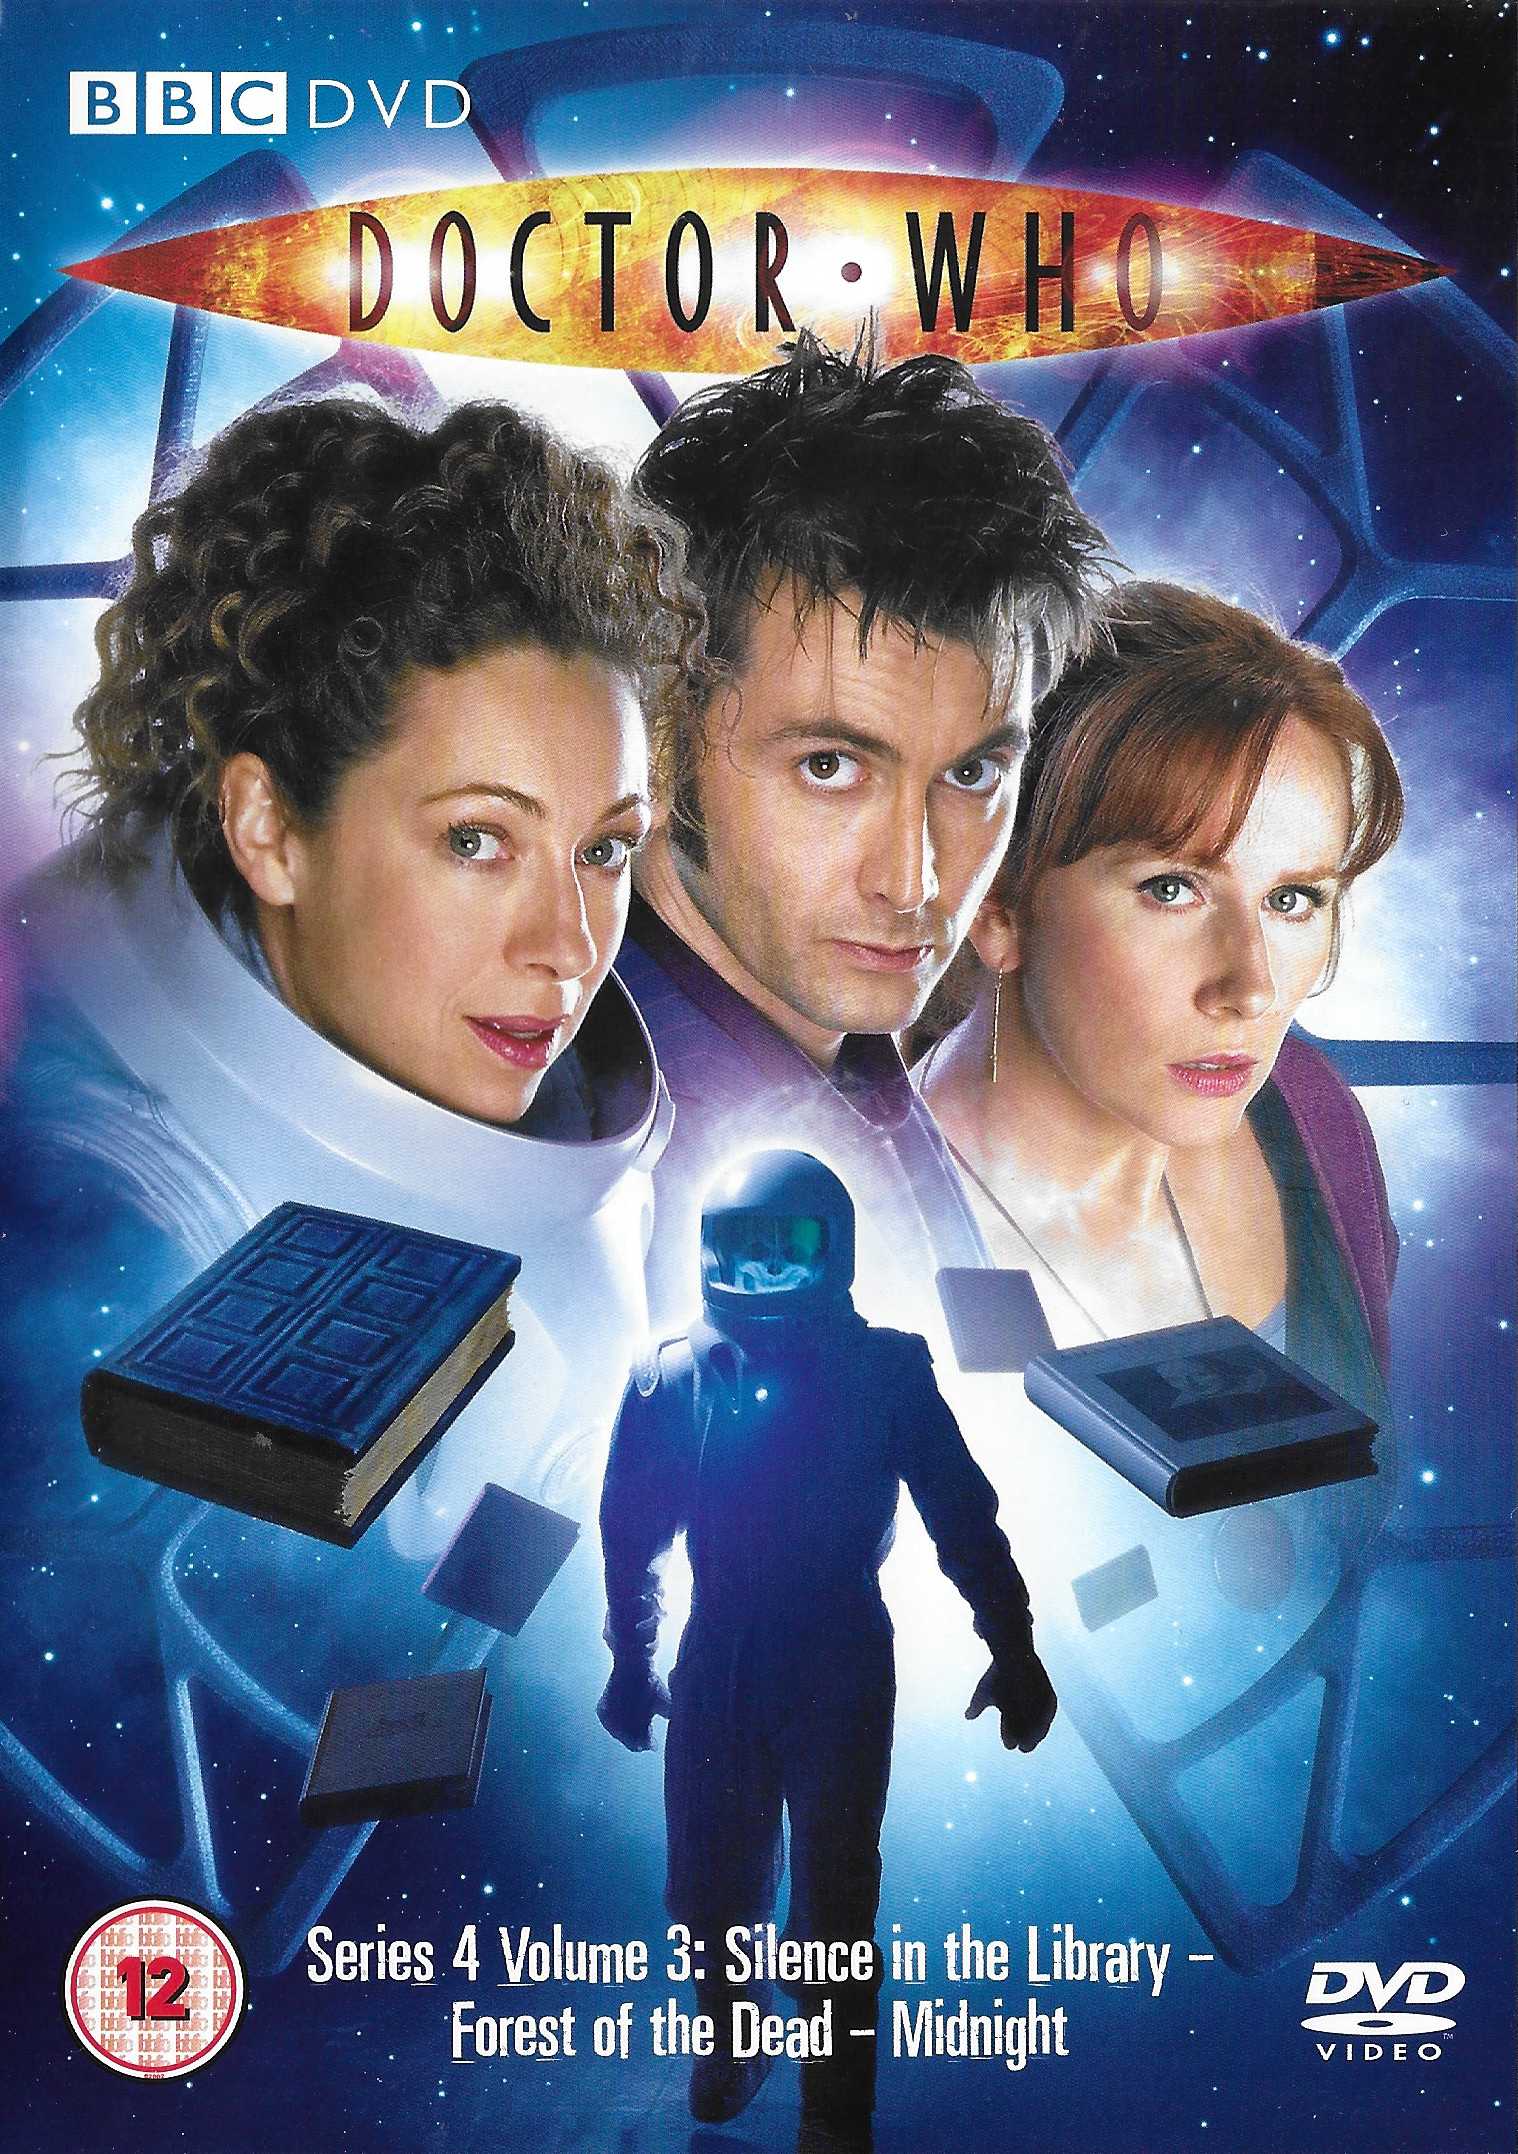 Picture of BBCDVD 2607 Doctor Who - Series 4, volume 3 by artist Steven Moffat / Russell T Davies from the BBC dvds - Records and Tapes library